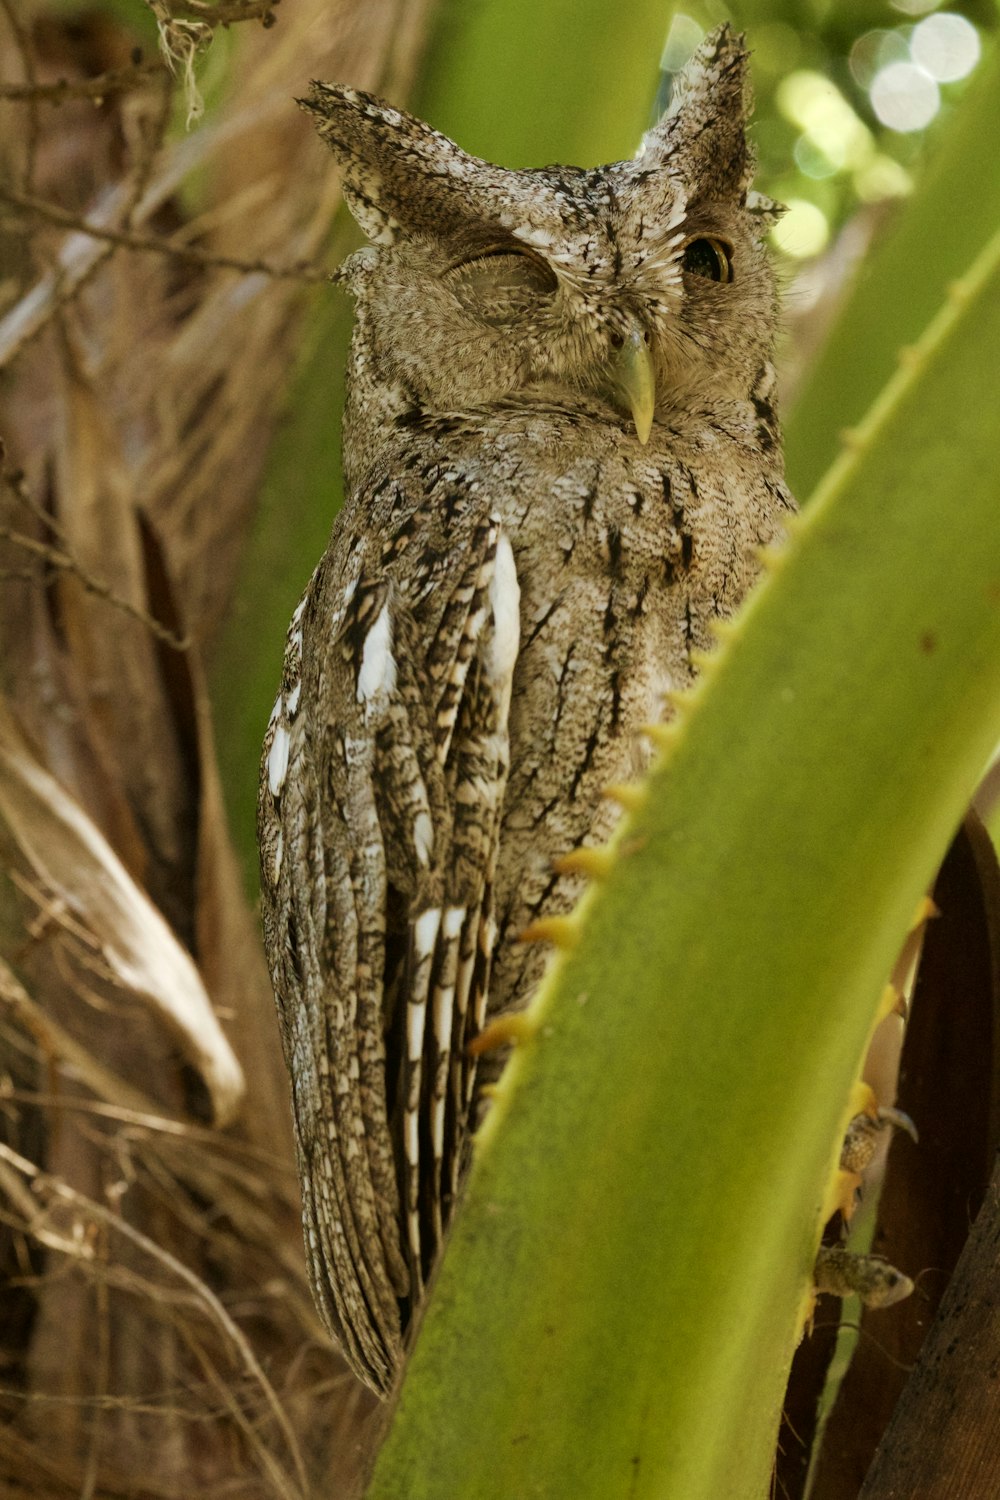 brown and white owl perched on green plant stem